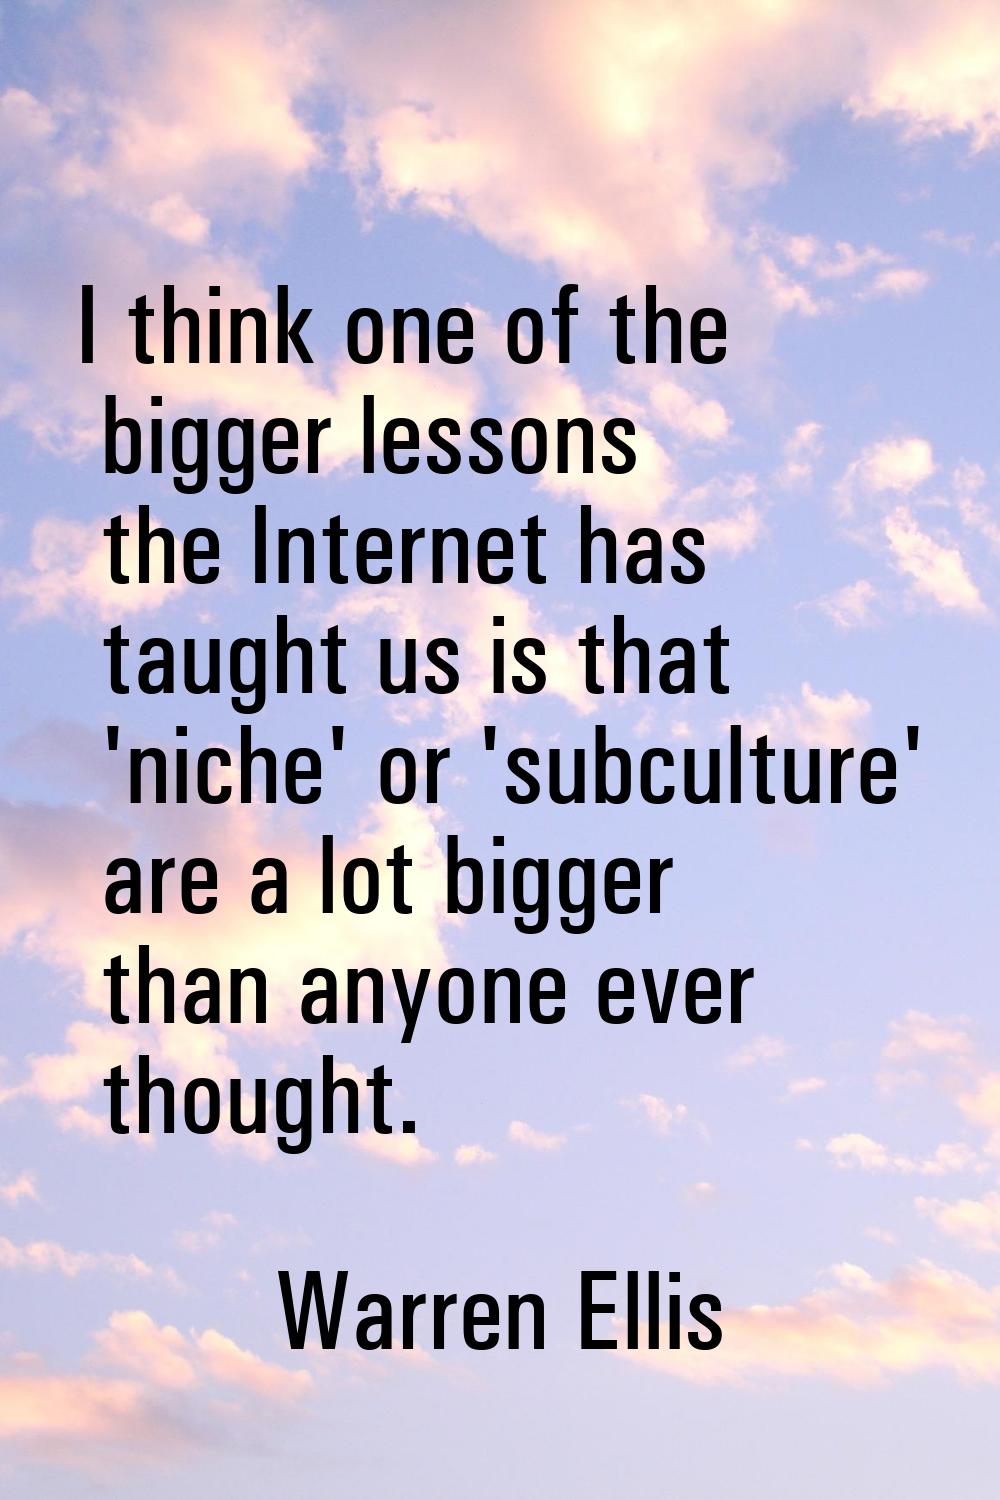 I think one of the bigger lessons the Internet has taught us is that 'niche' or 'subculture' are a 